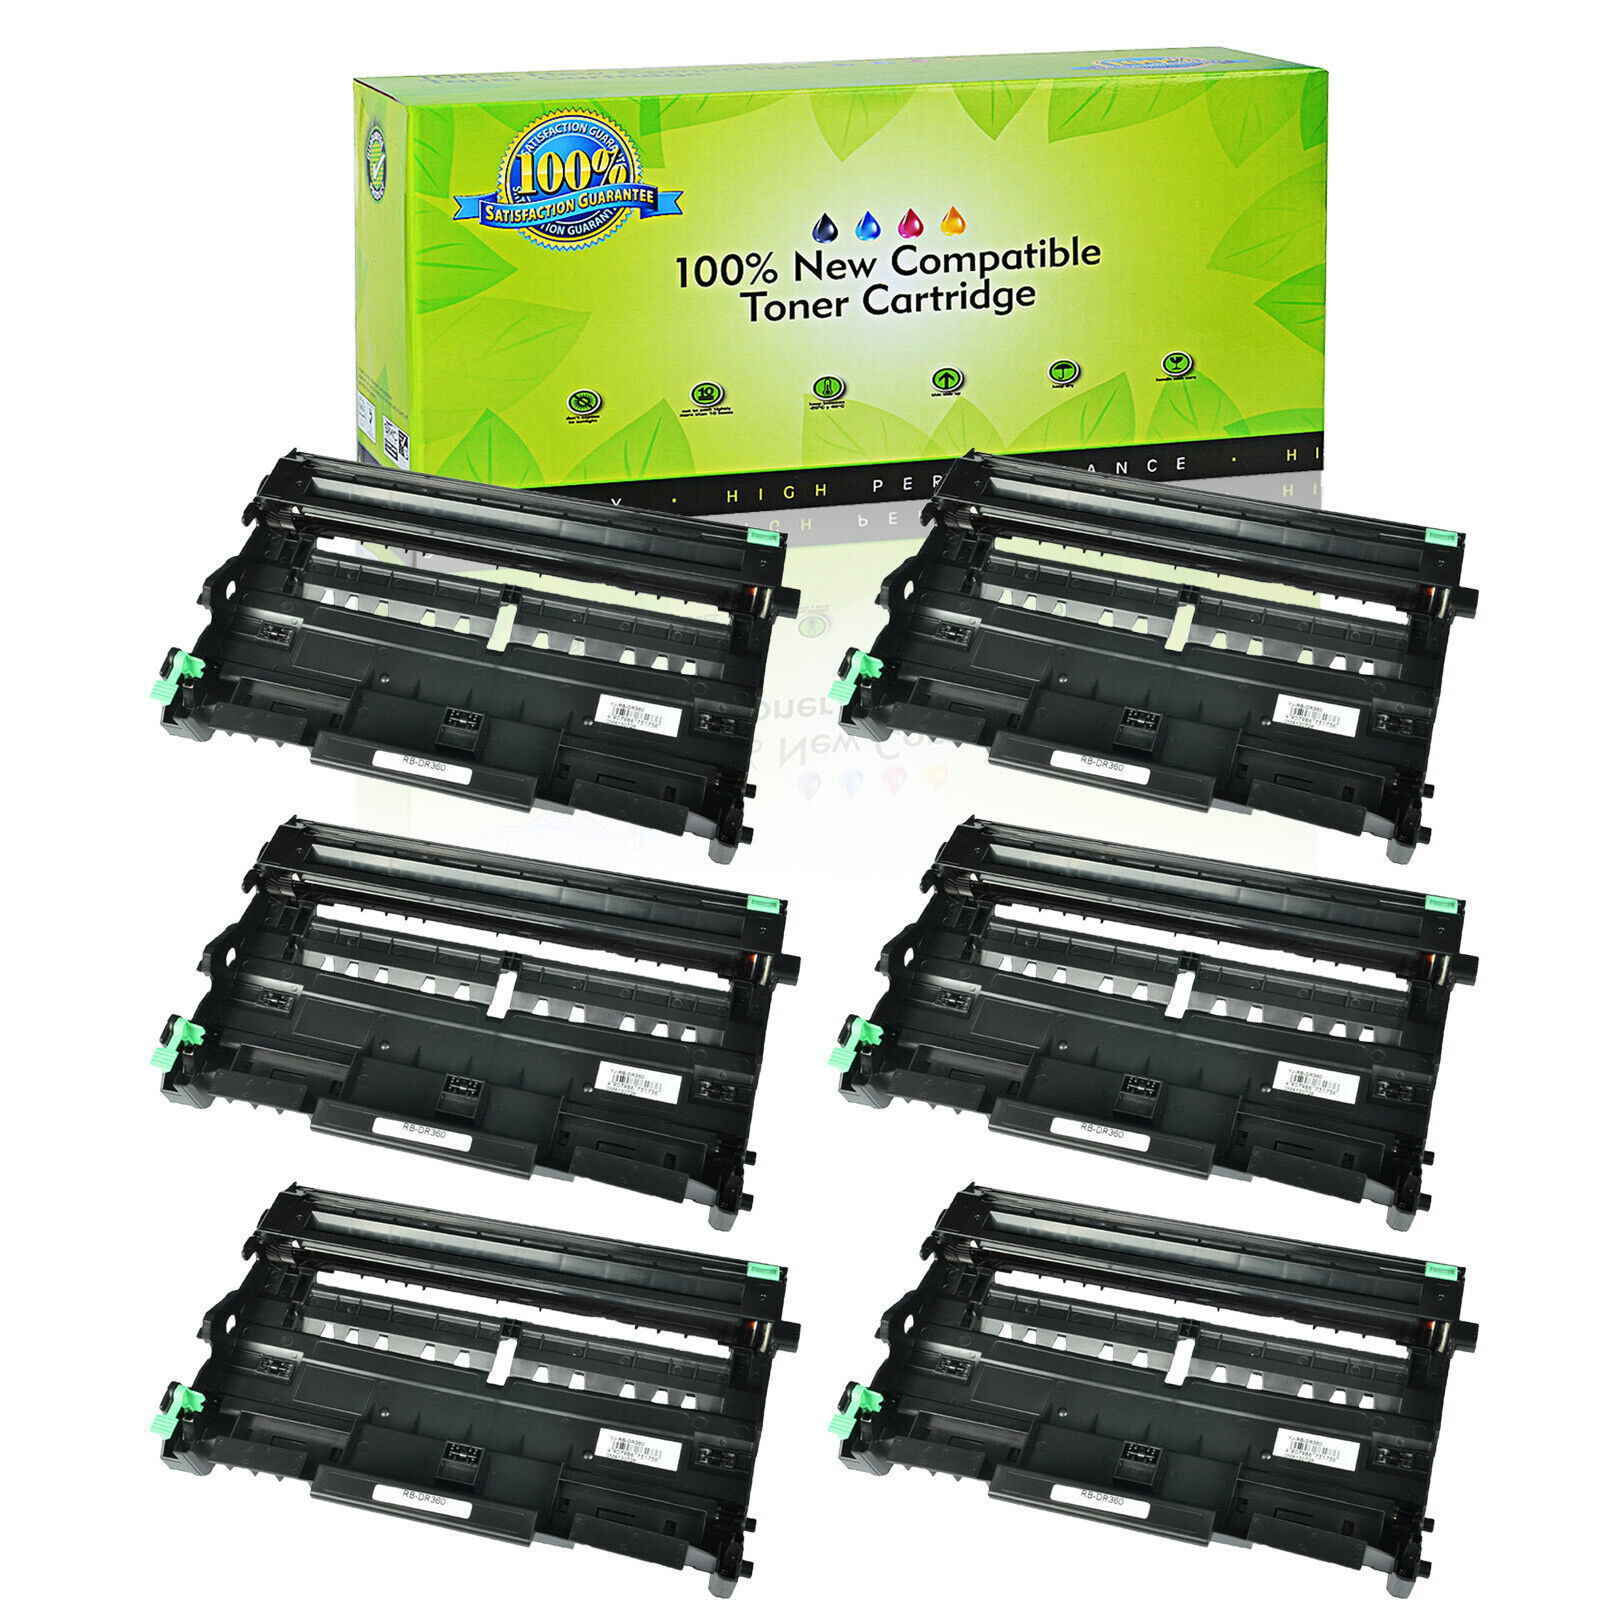 6PK DR360 High Yield Drum Unit For Brother MFC-7320 MFC-7340 MFC-7440 7450 7840N